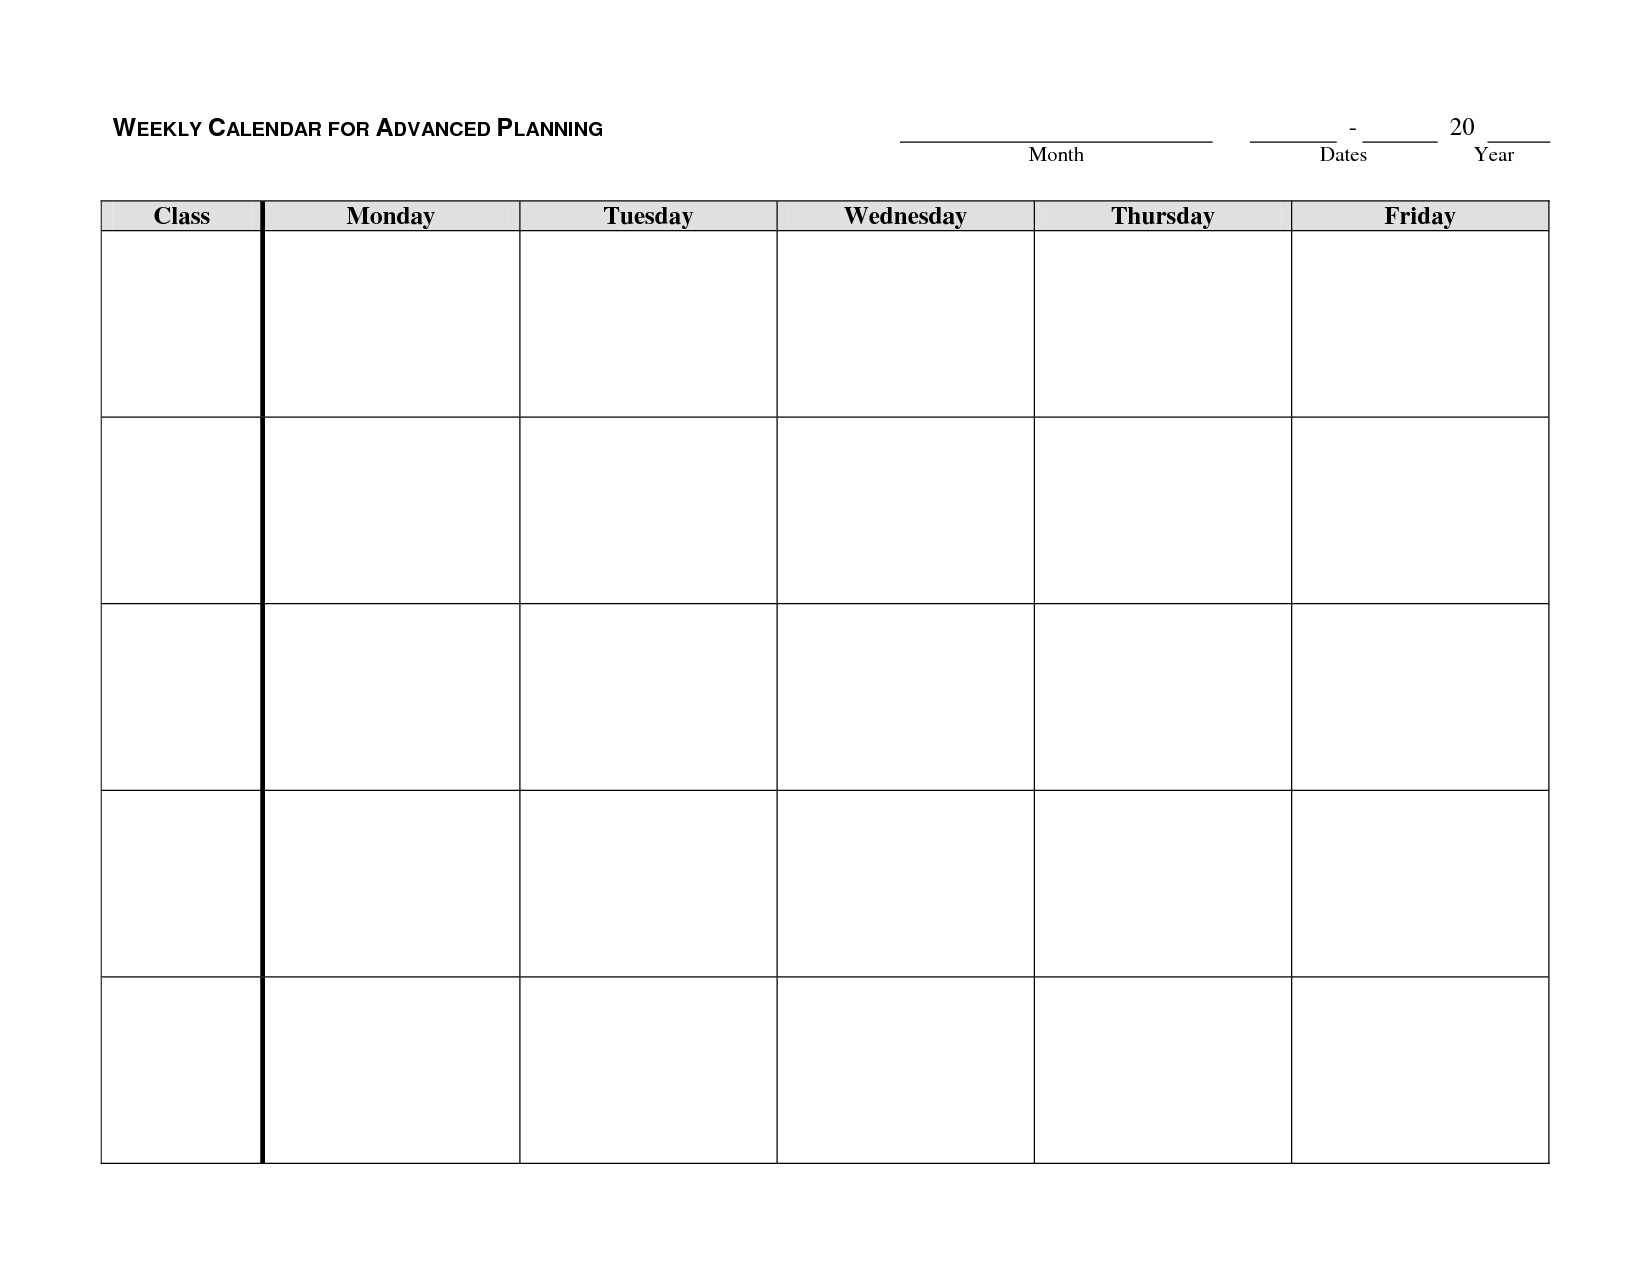 27 Images Of Week Schedule Template Monday Friday | Bfegy with regard to Printable Weekly Calendar Monday Through Friday